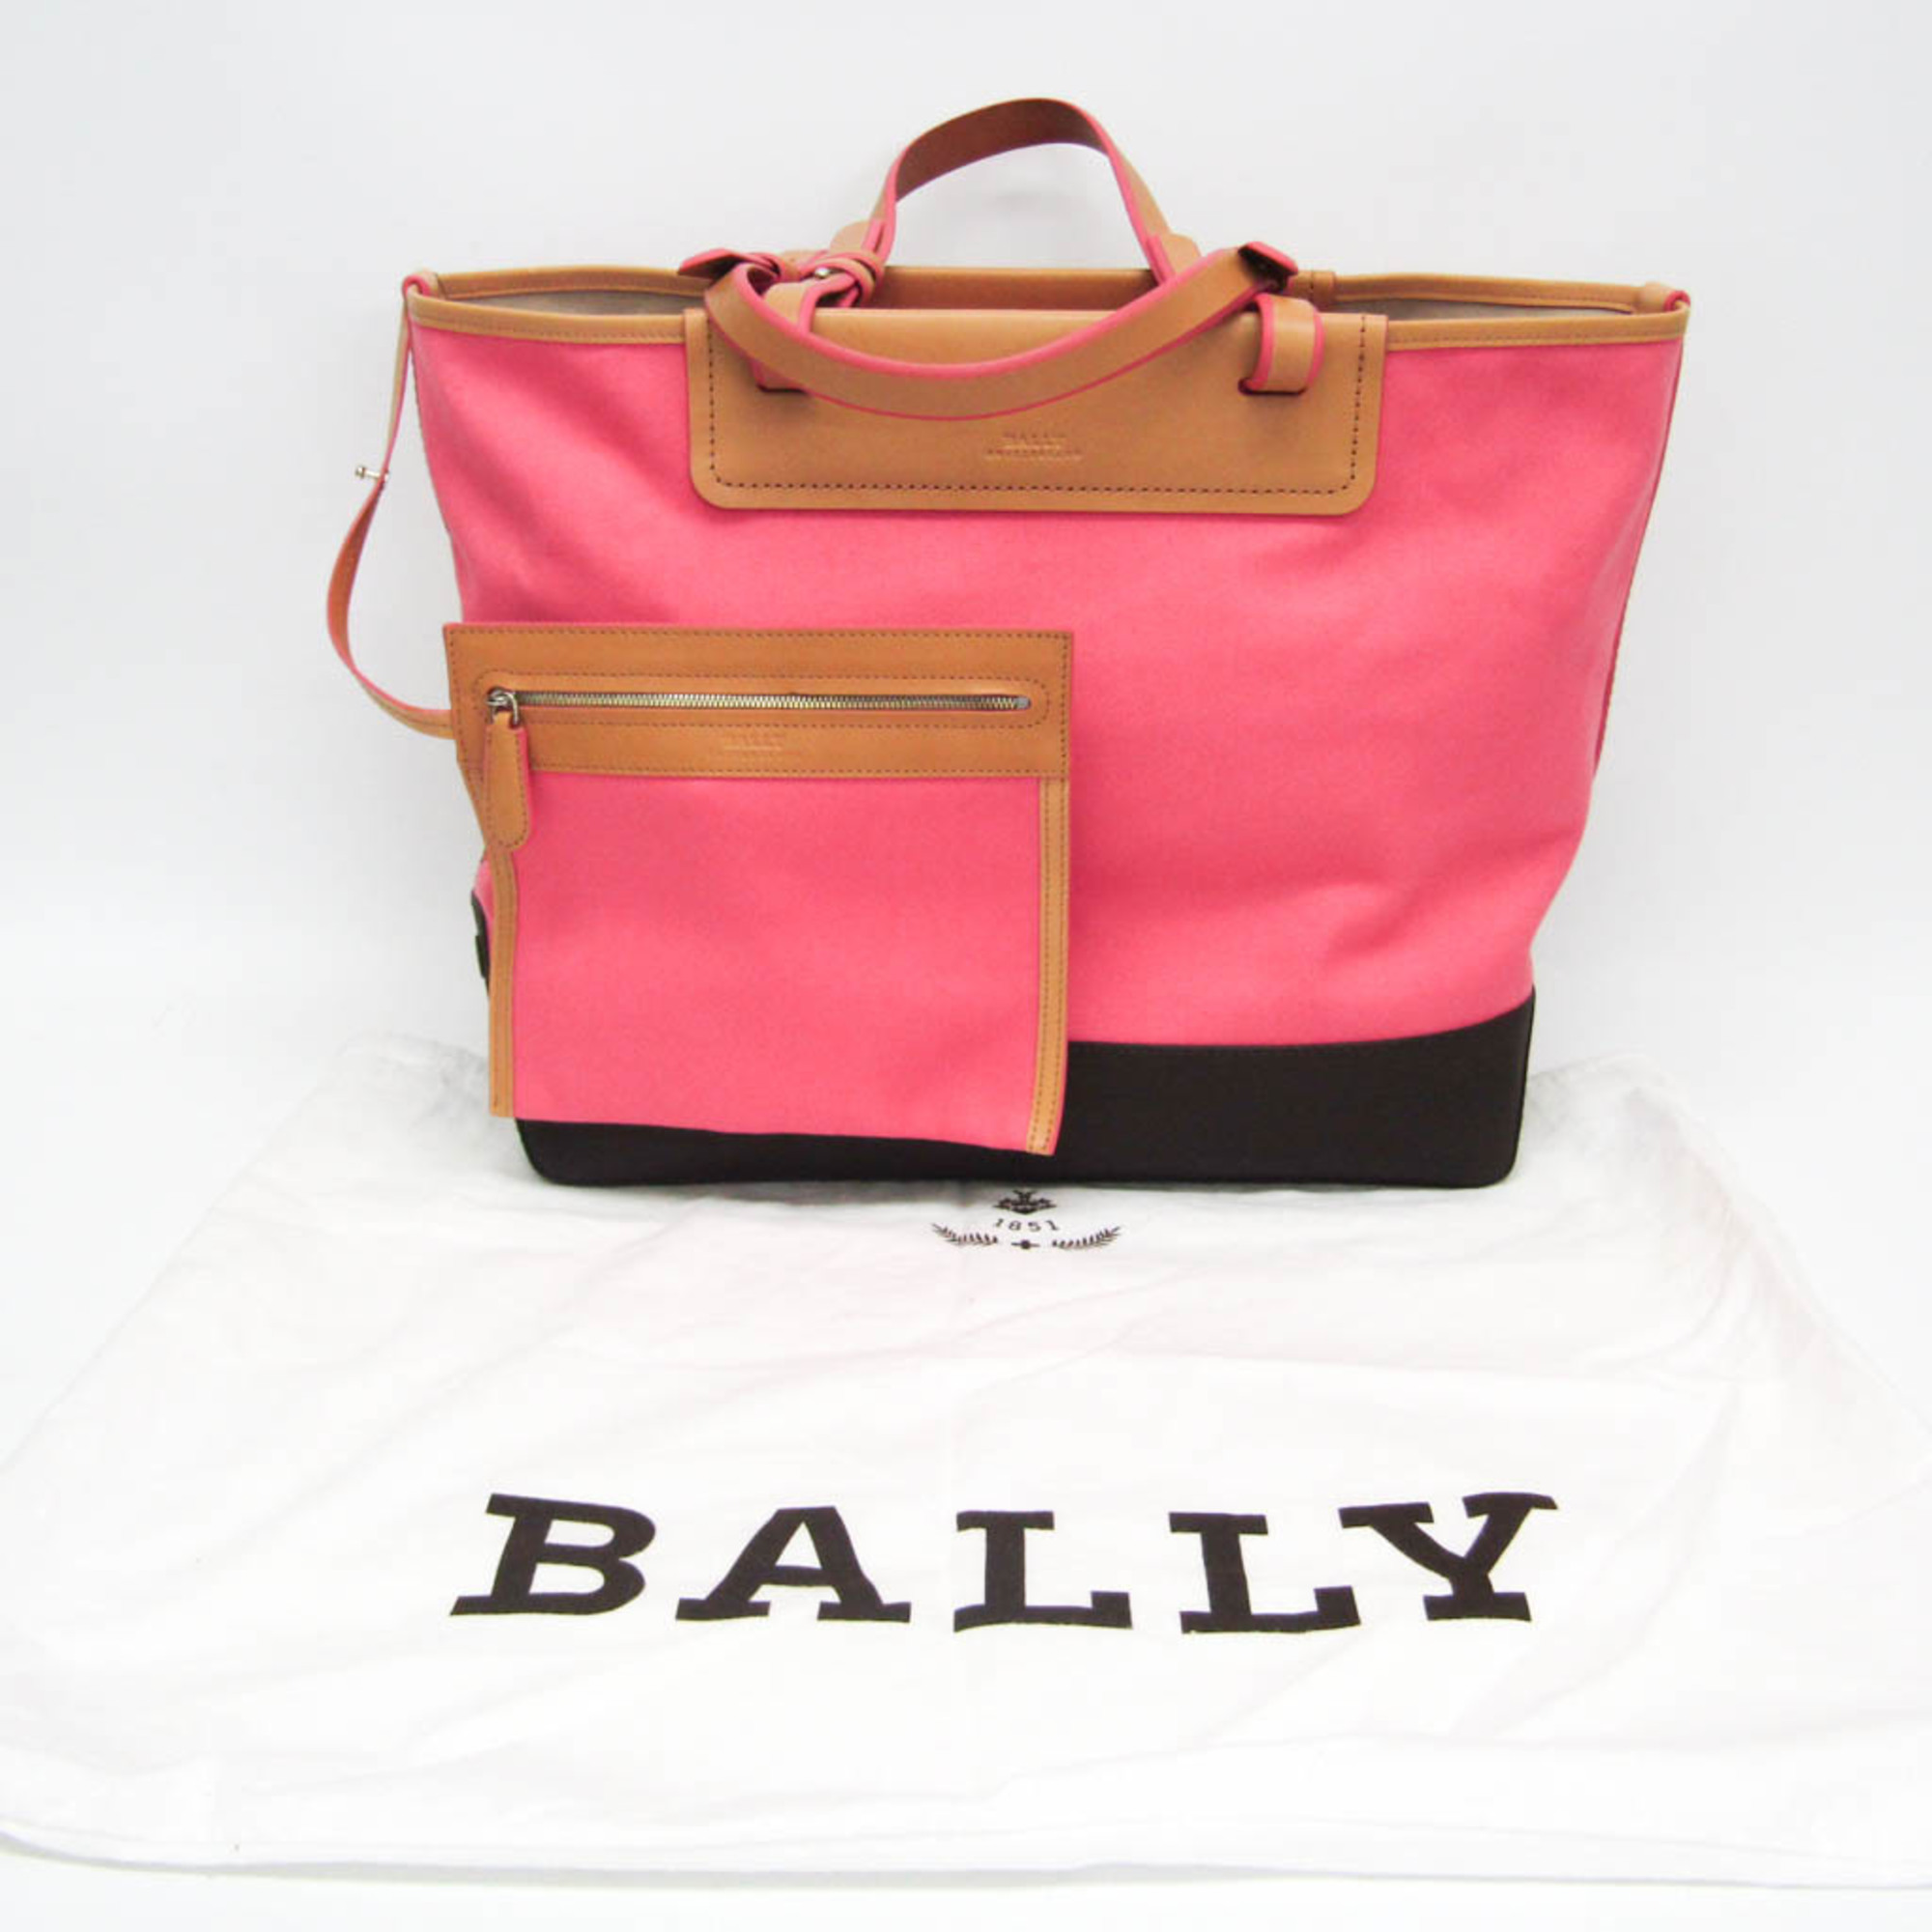 Bally BATINKA Women's Leather,Canvas Tote Bag Beige,Coral Pink,Dark Brown